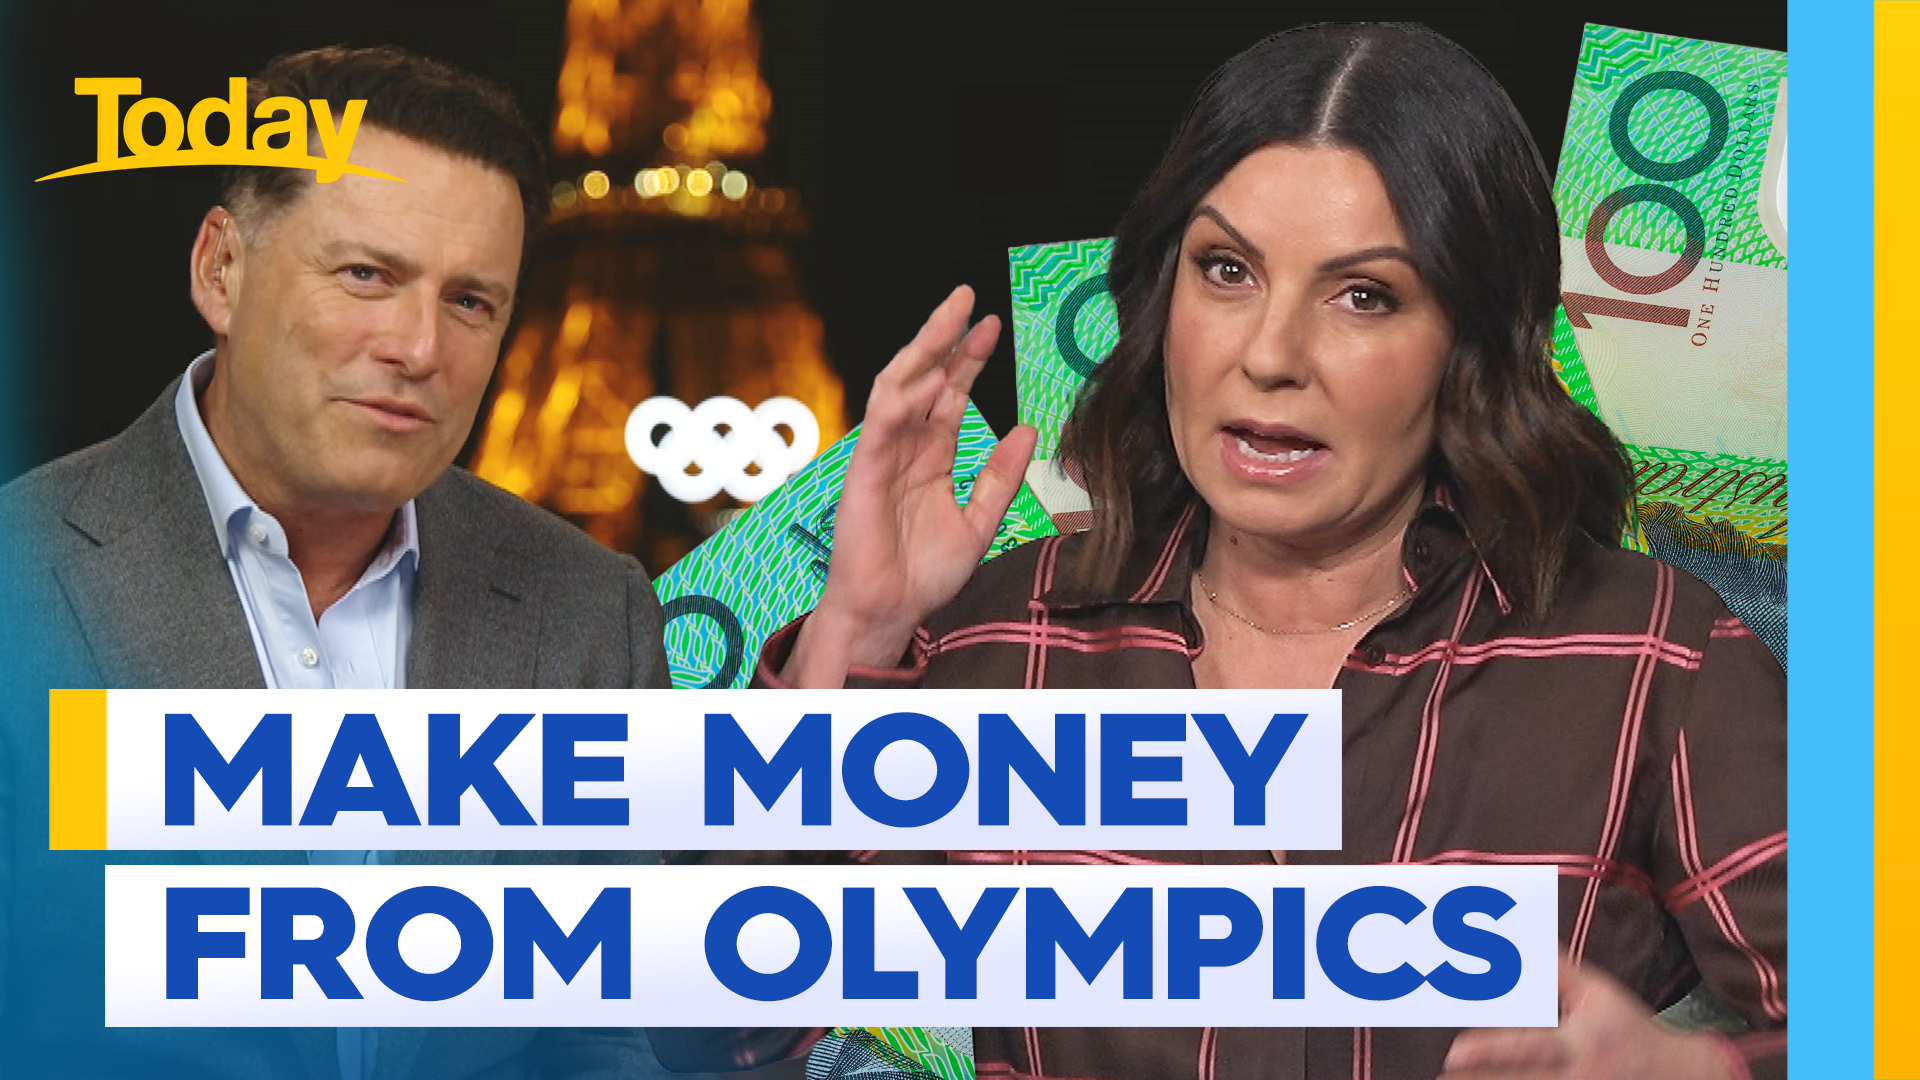 Big money to be made in Olympic memorabilia